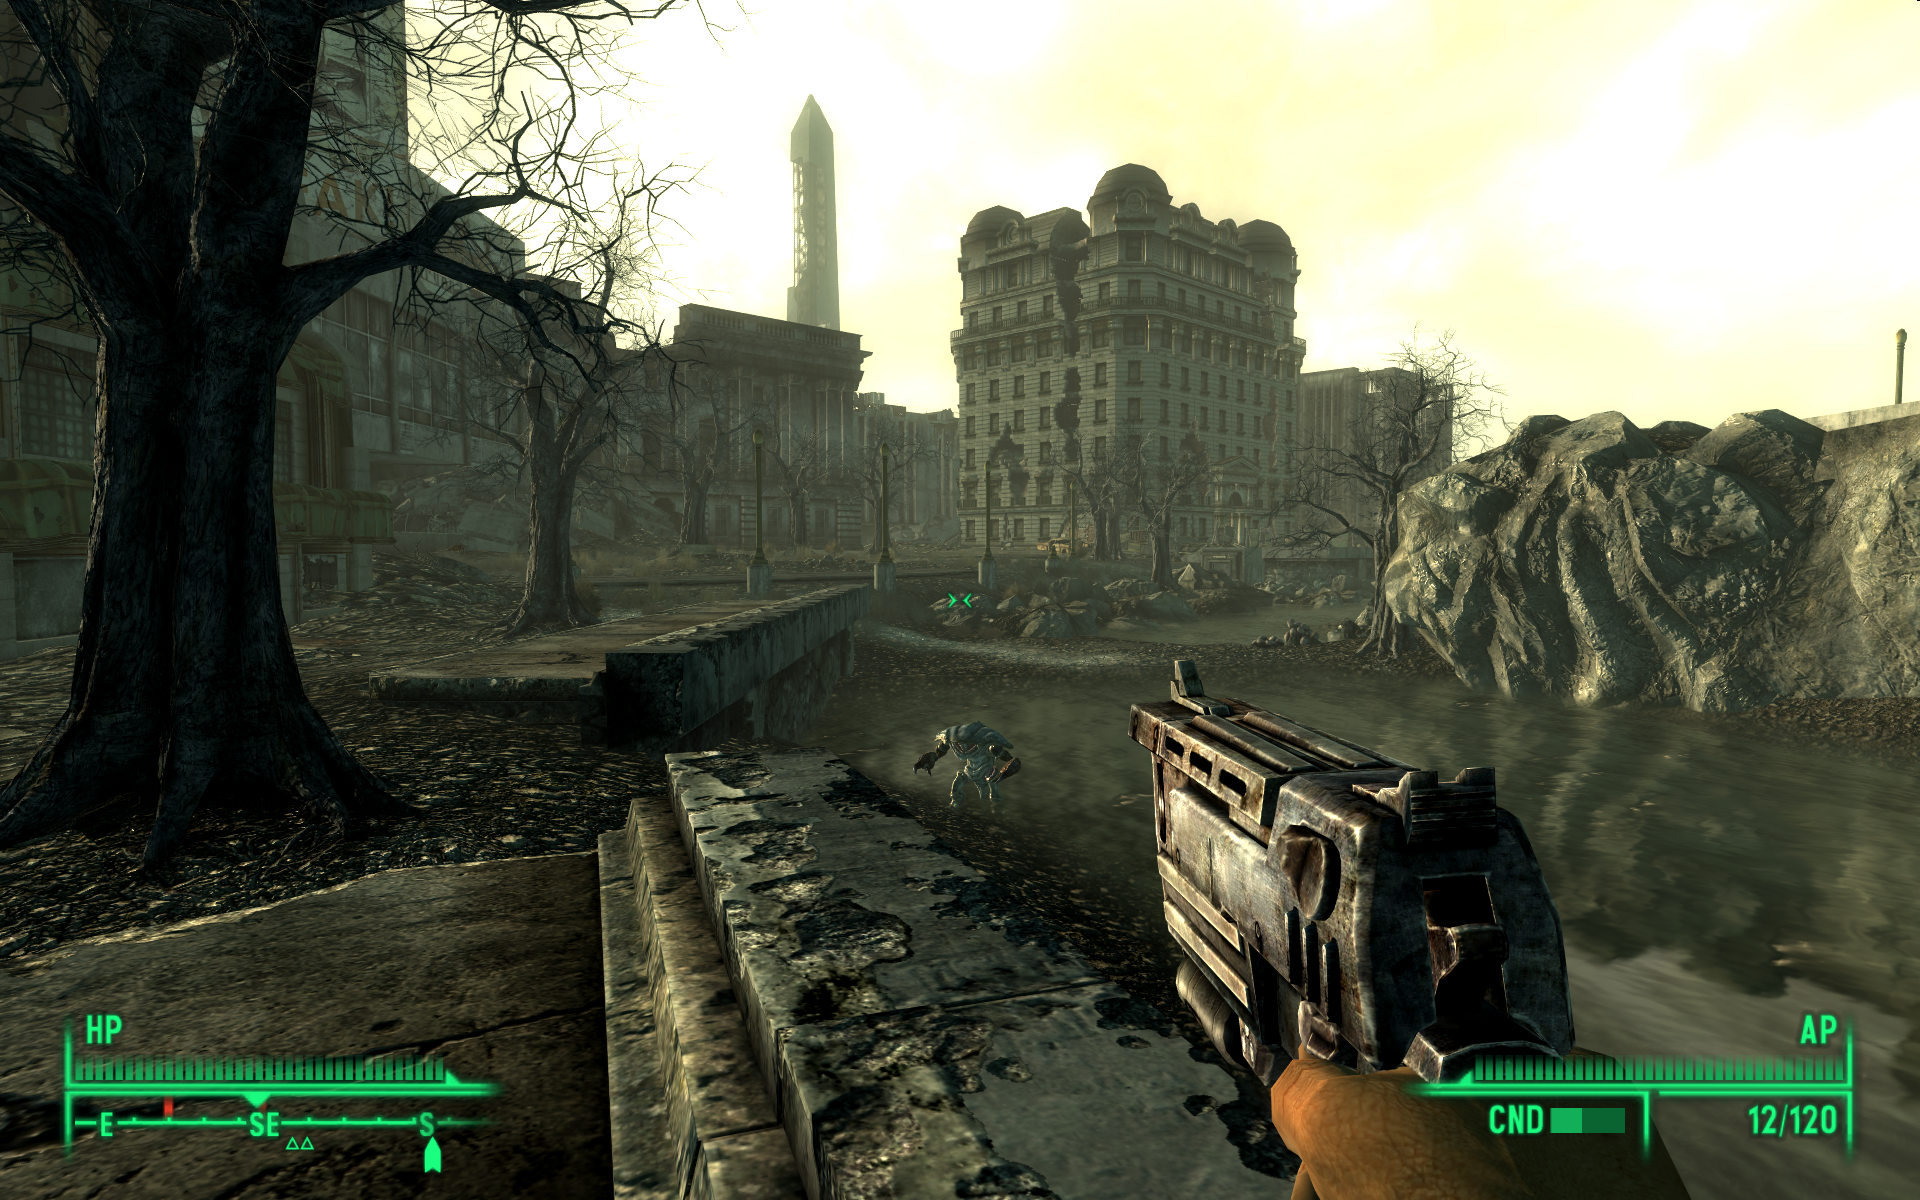 Screenshot of post-apocalyptic city taken from Fallout 3